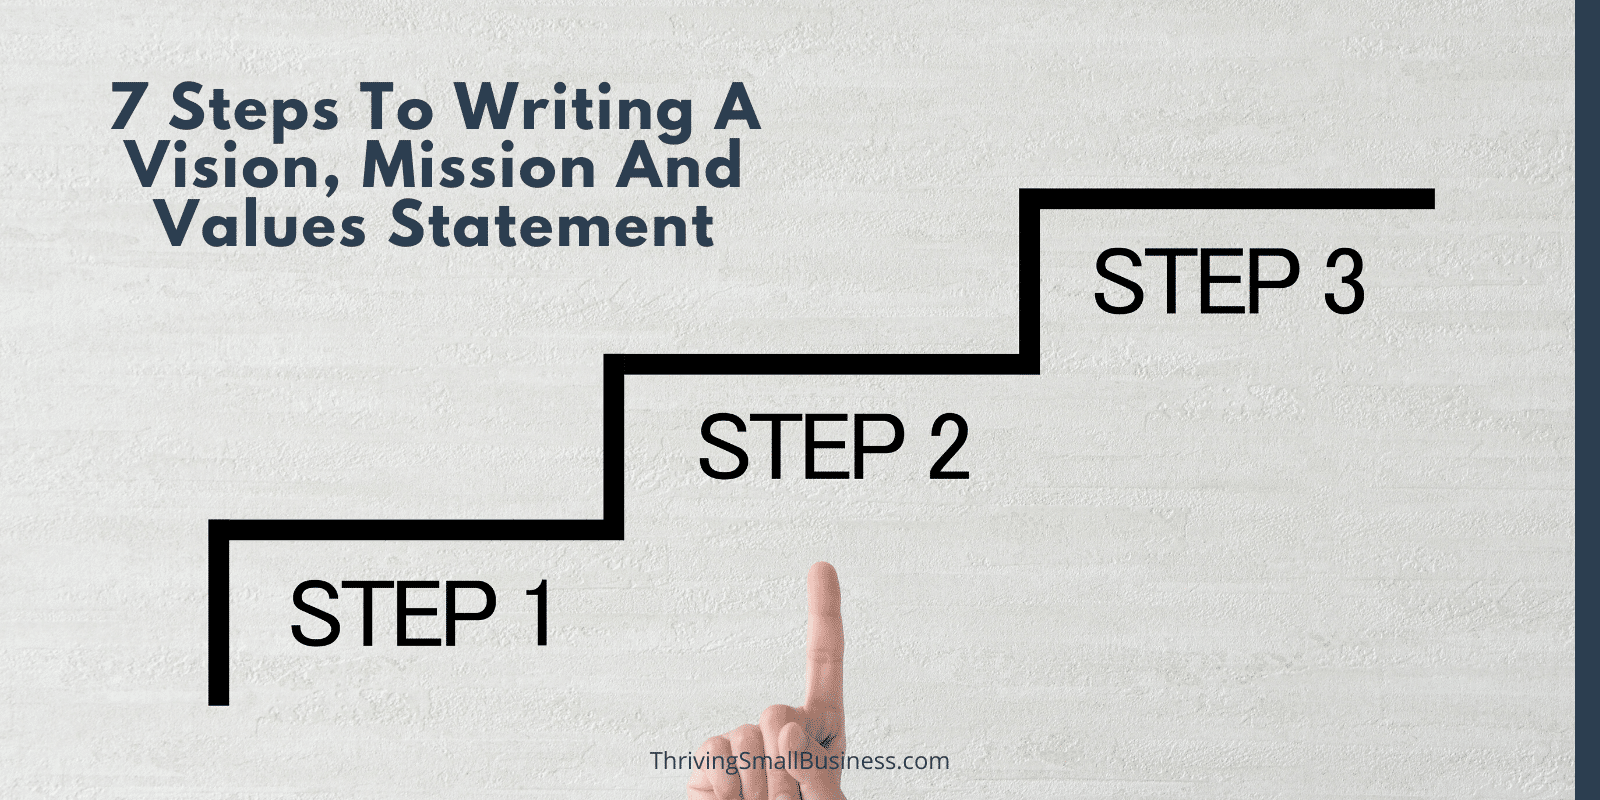 30 Steps to Writing a Vision, Mission and Values Statement – The